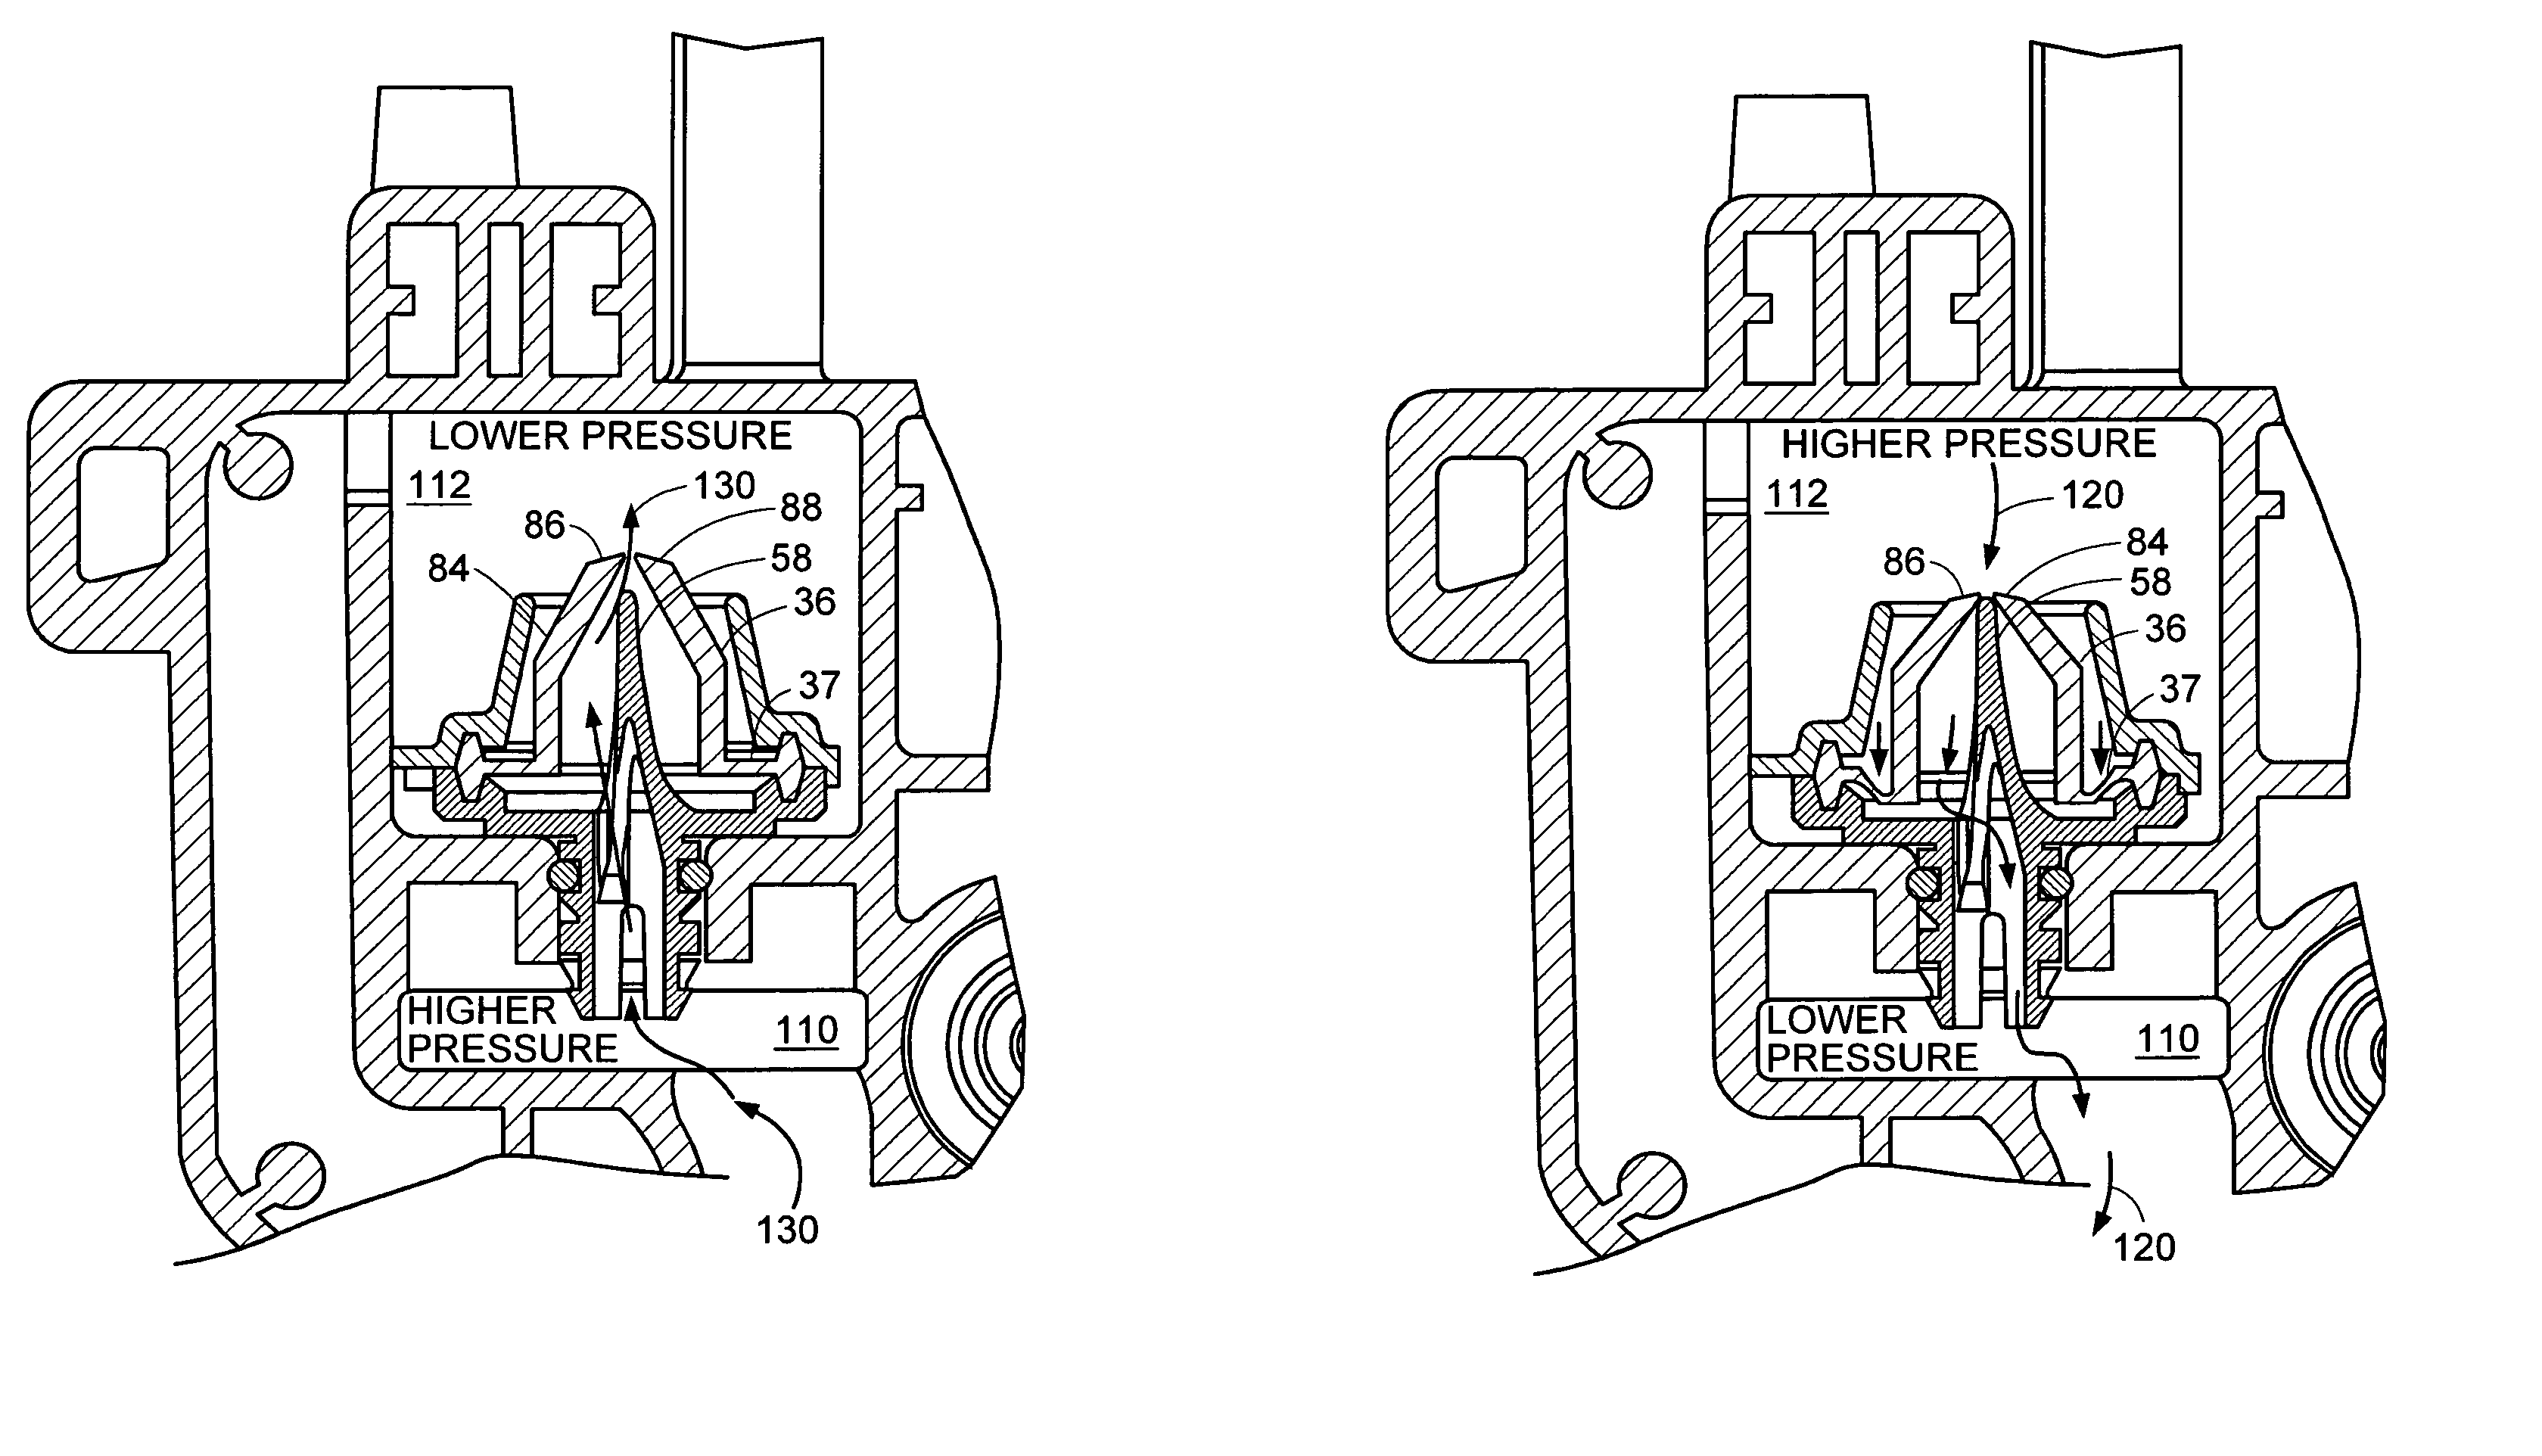 Valve for use with chest drainage system